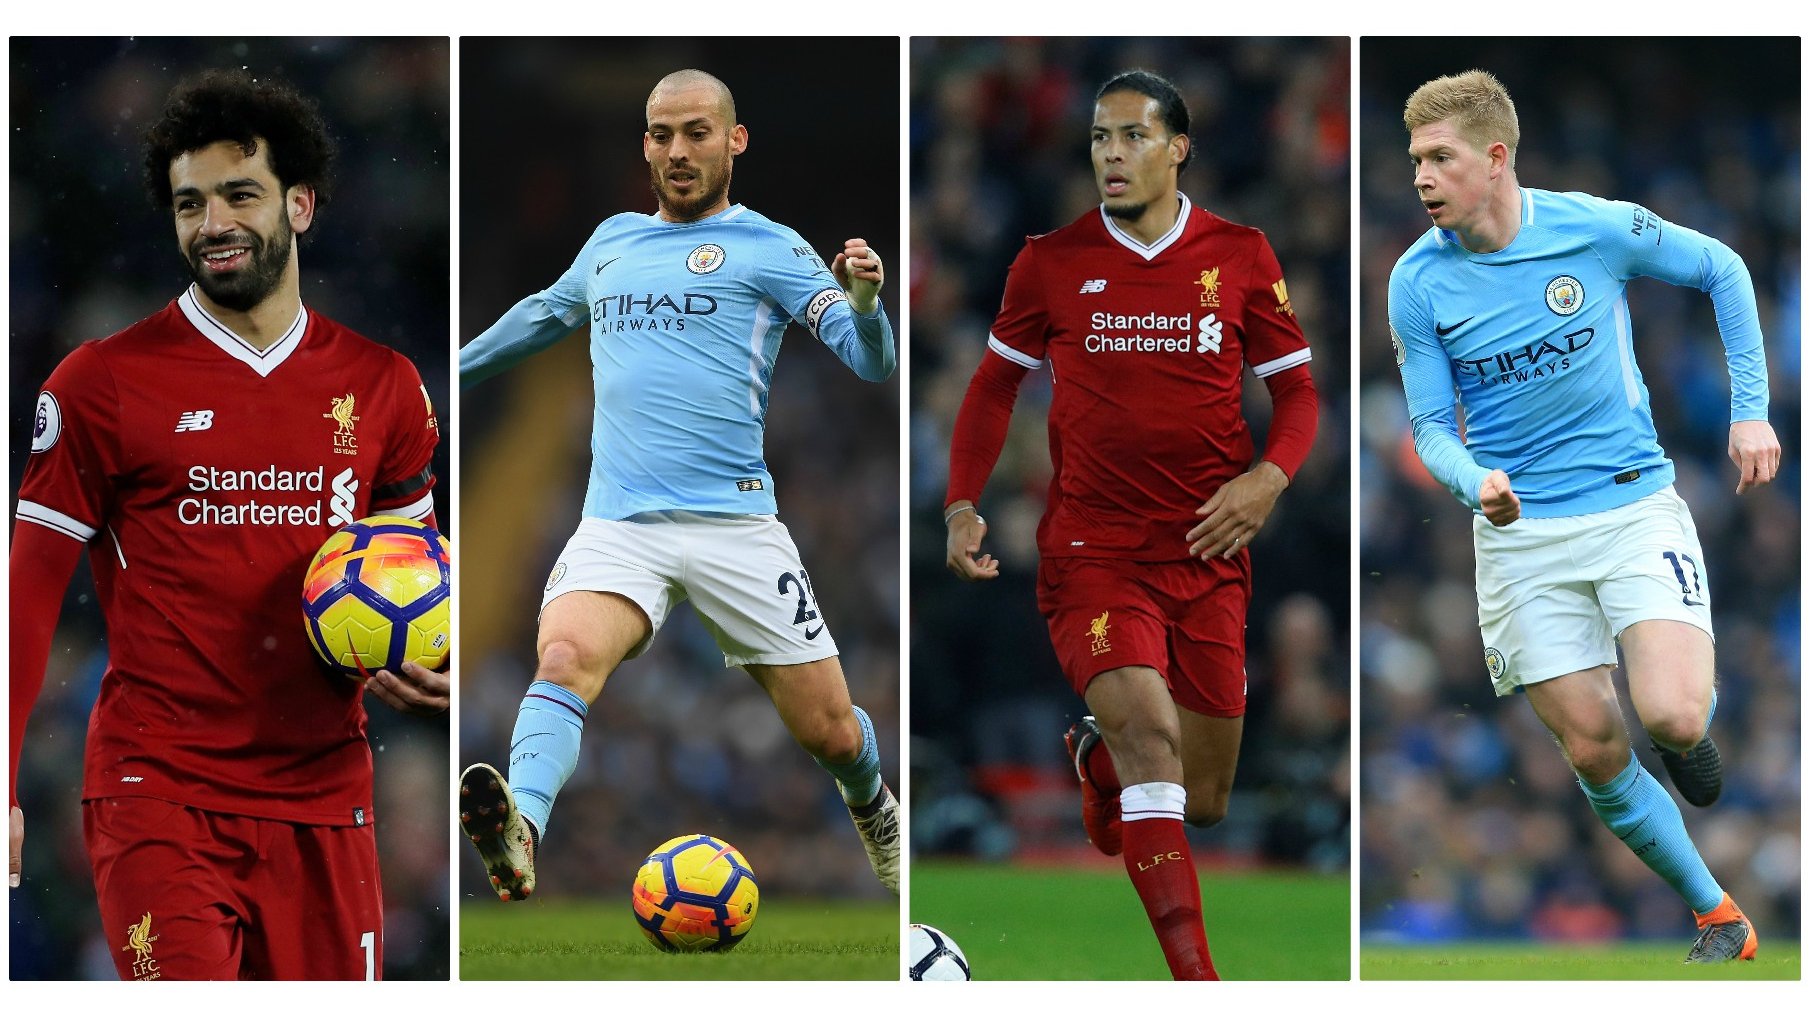 Sane or Mane? Firmino or Jesus? Pick your combined Man City-Liverpool XI